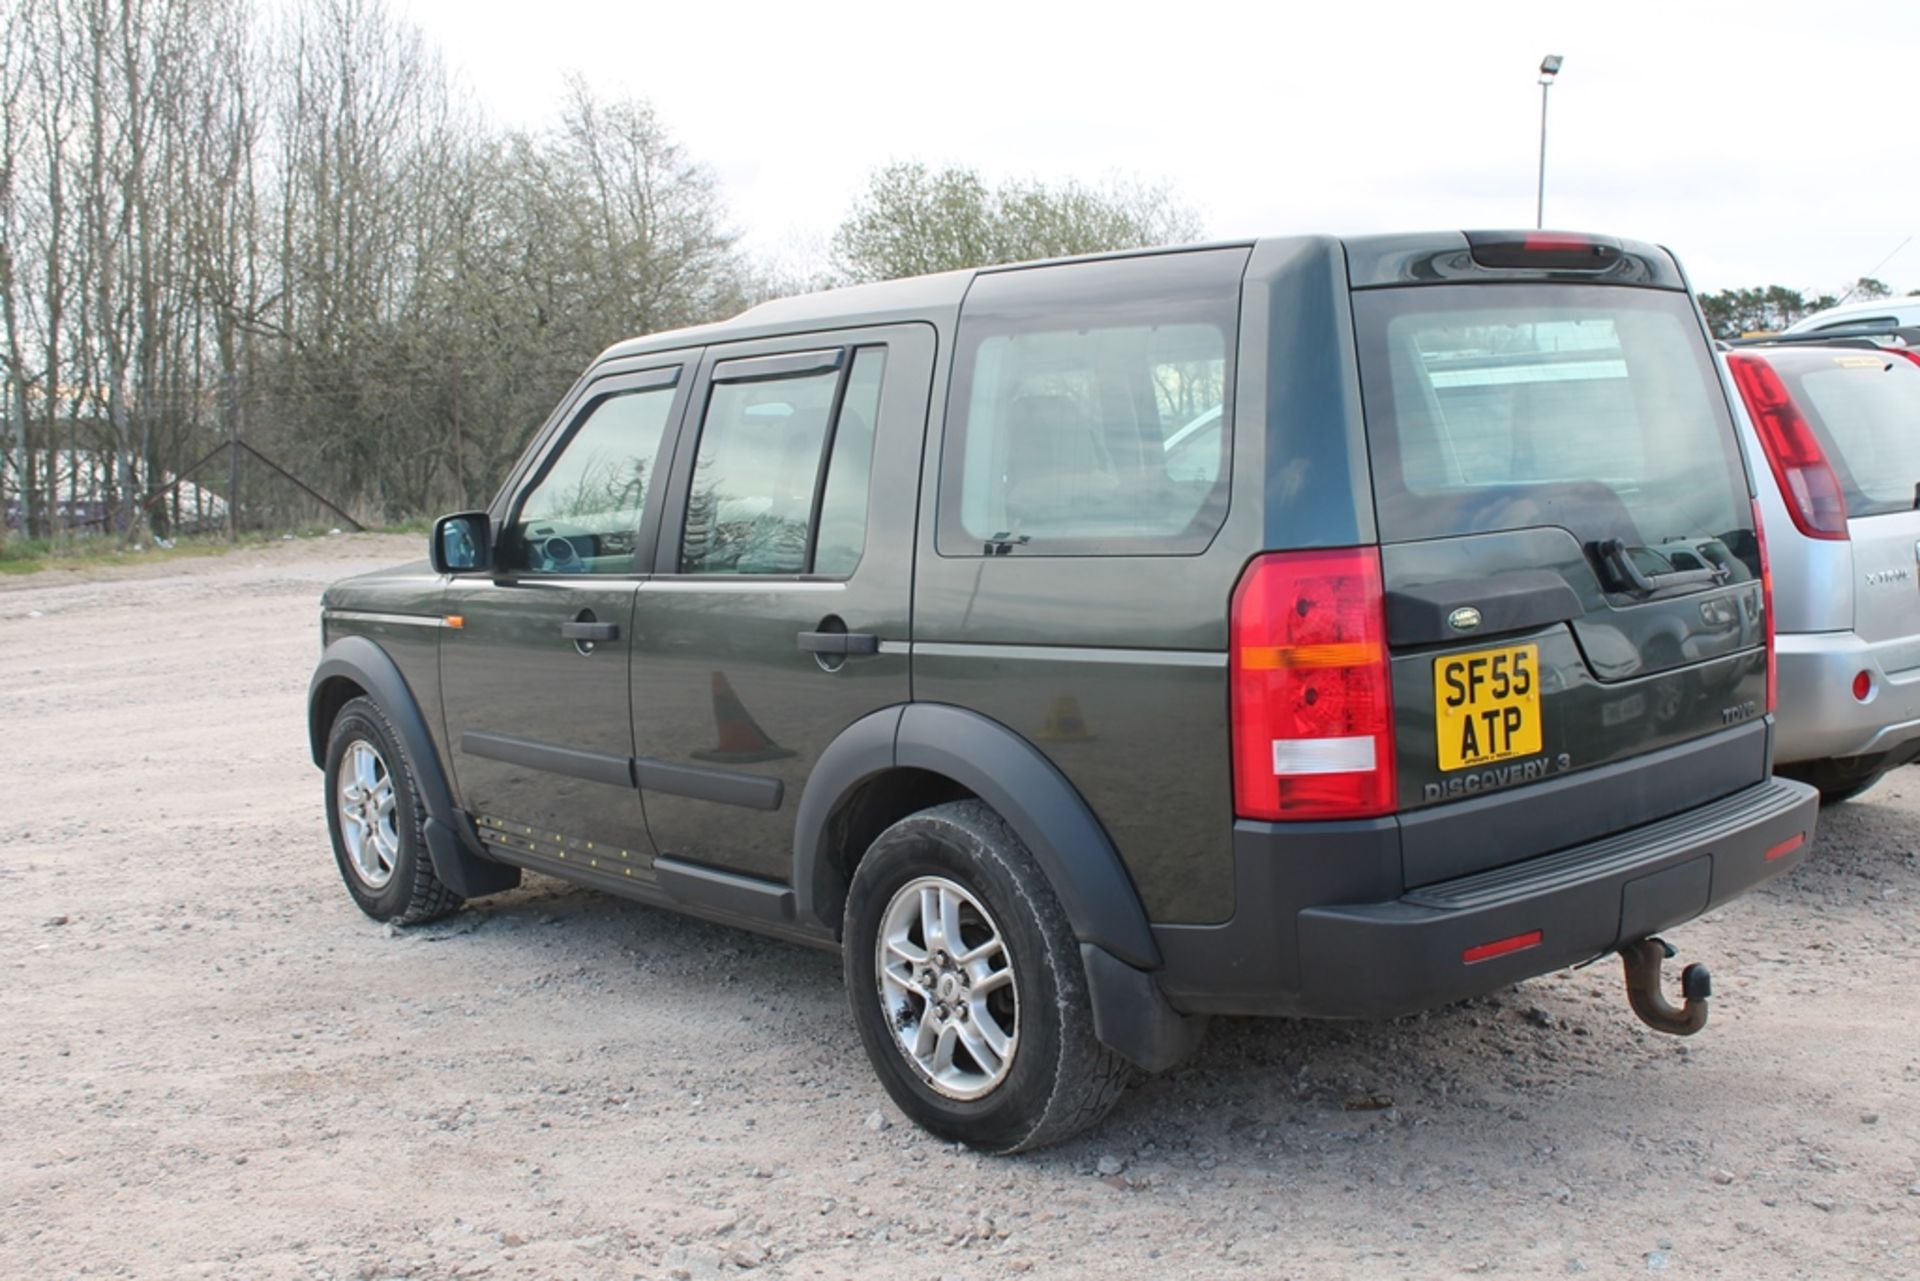 Land Rover Discovery 3 Tdv6 - 2720cc 5 Door Estate - Image 3 of 4